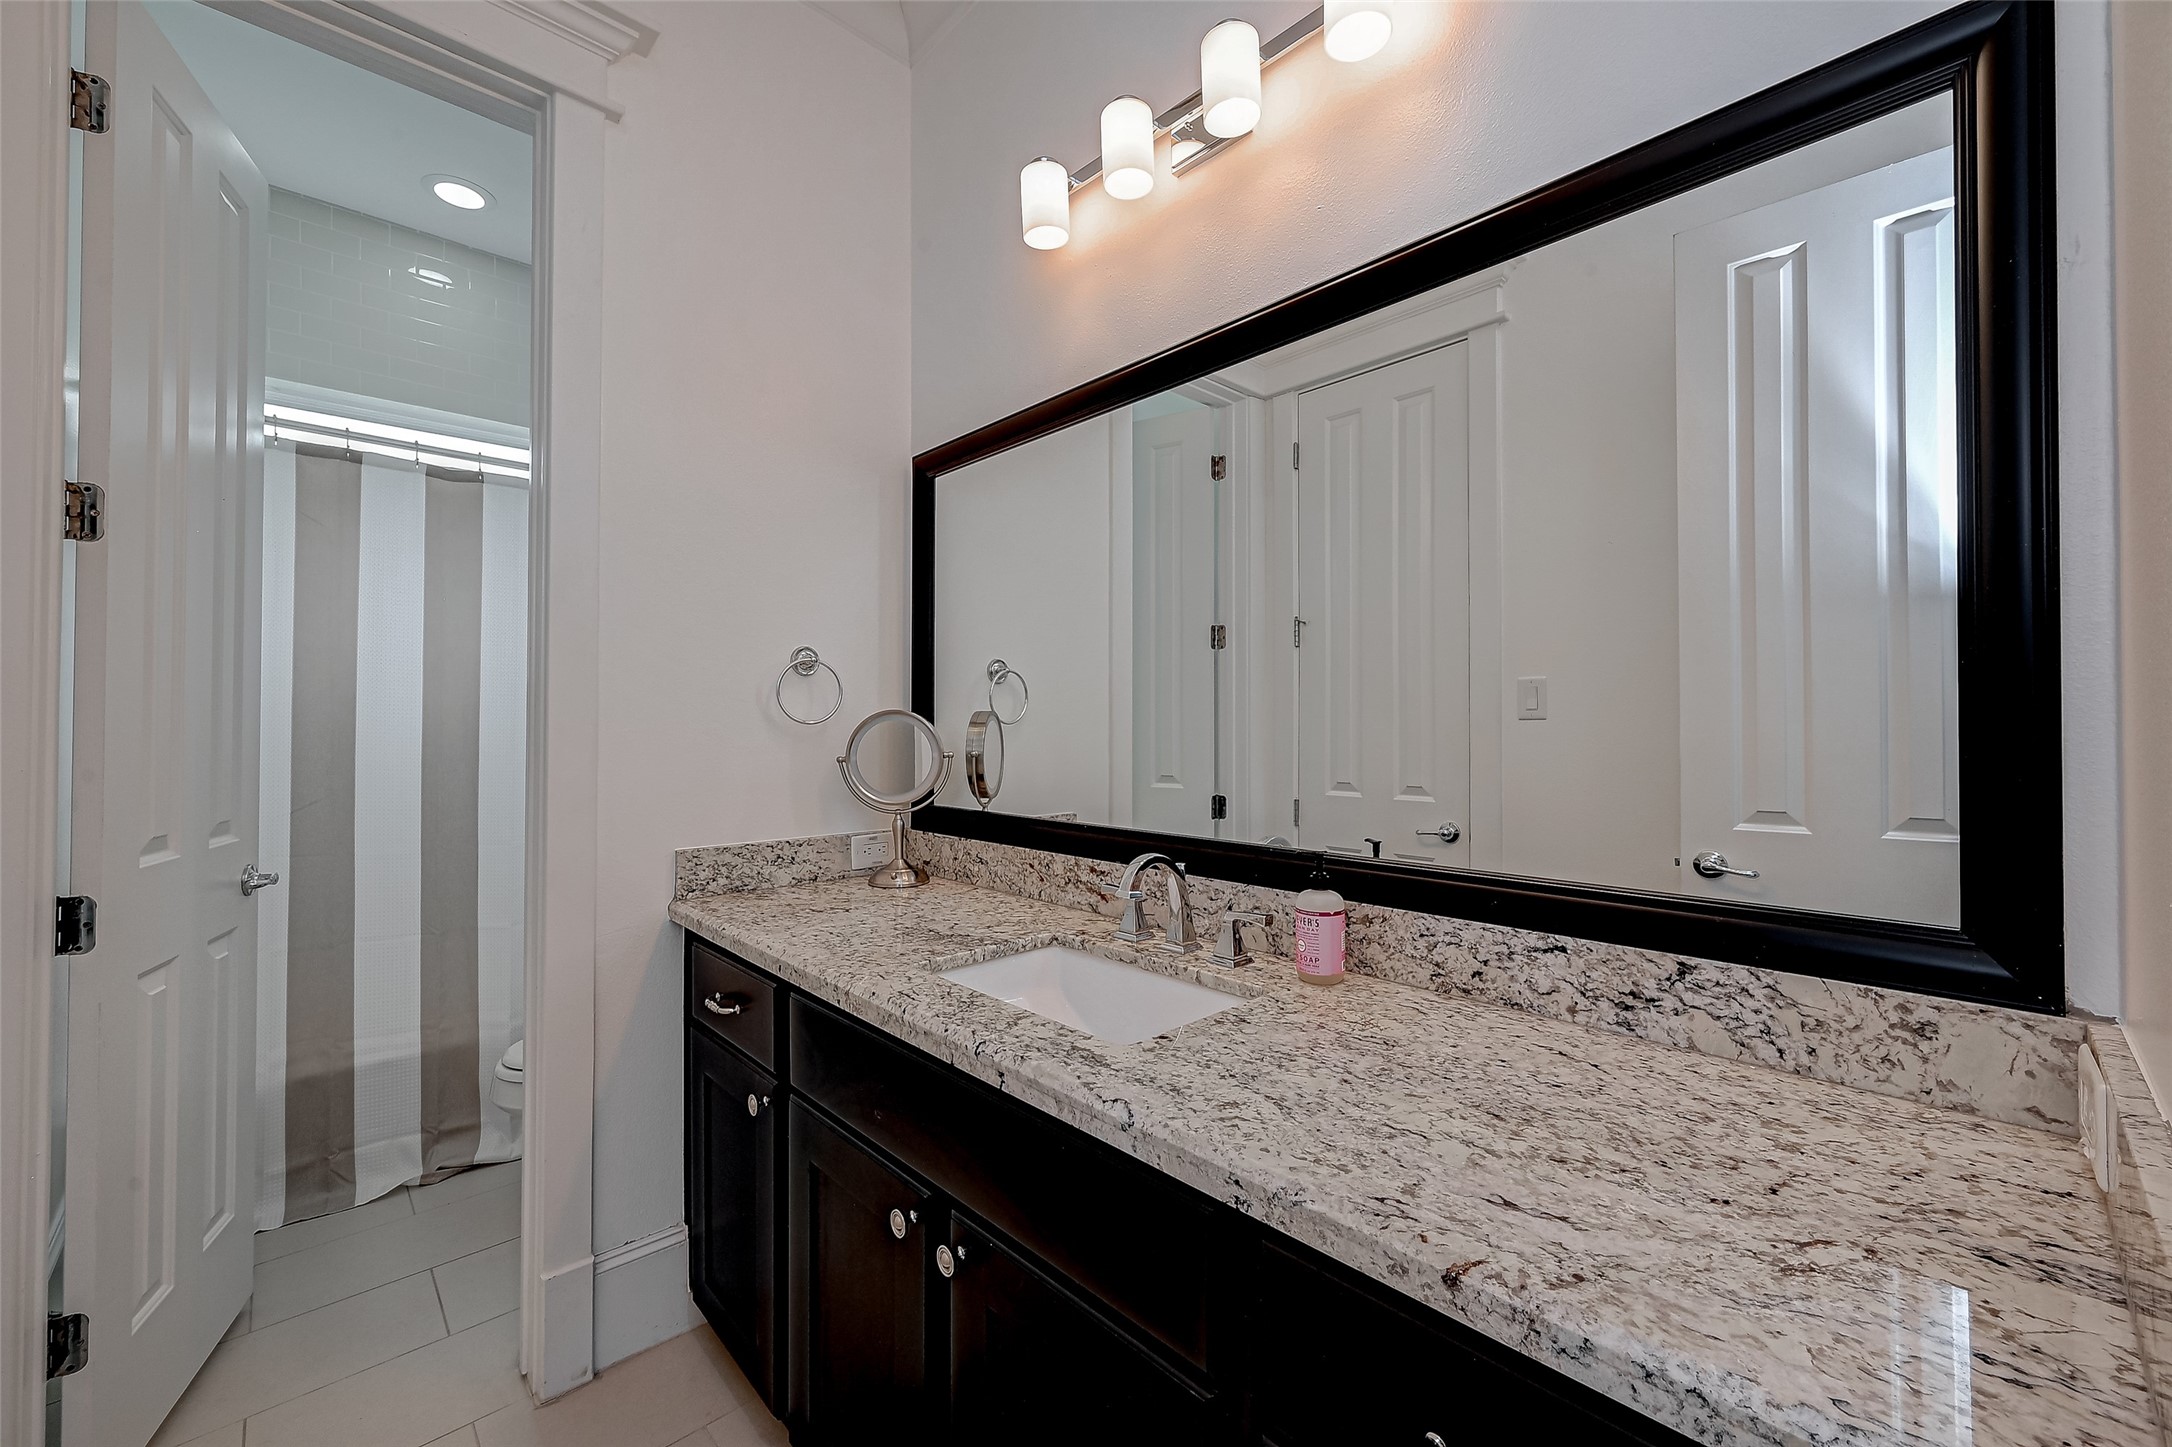 This thoughtfully designed bathroom creates an atmosphere of style and convenience, with a separate vanity area. This division allows for uninterrupted routines all within a single harmonious space.